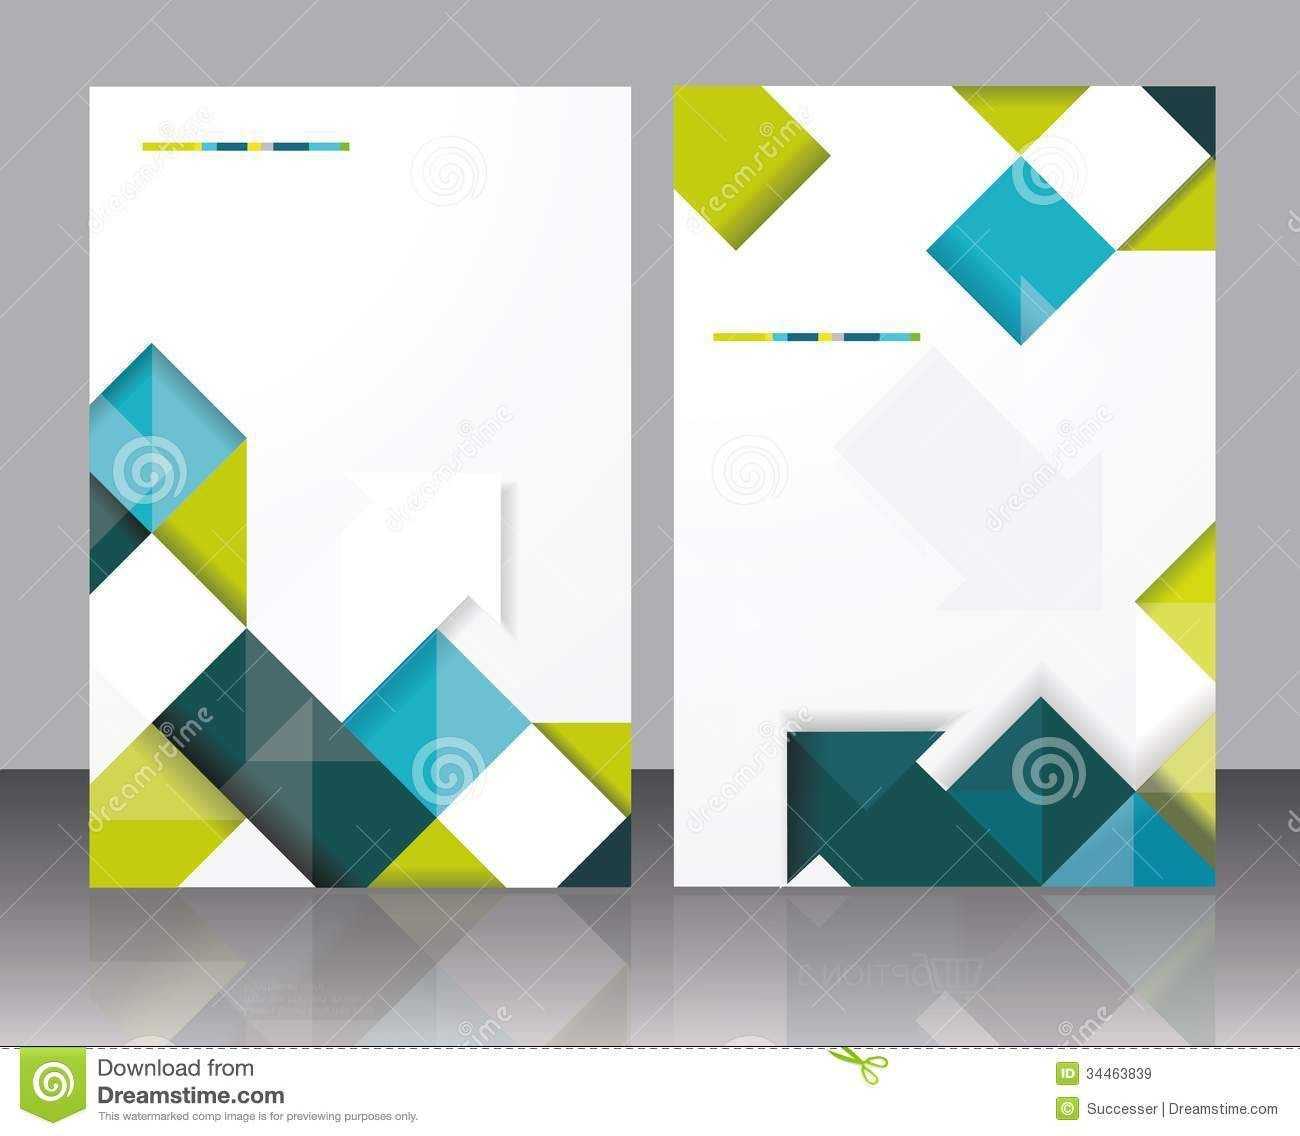 001 Template Ideas Word Brochure Free Staggering Ms Download Inside Online Free Brochure Design Templates